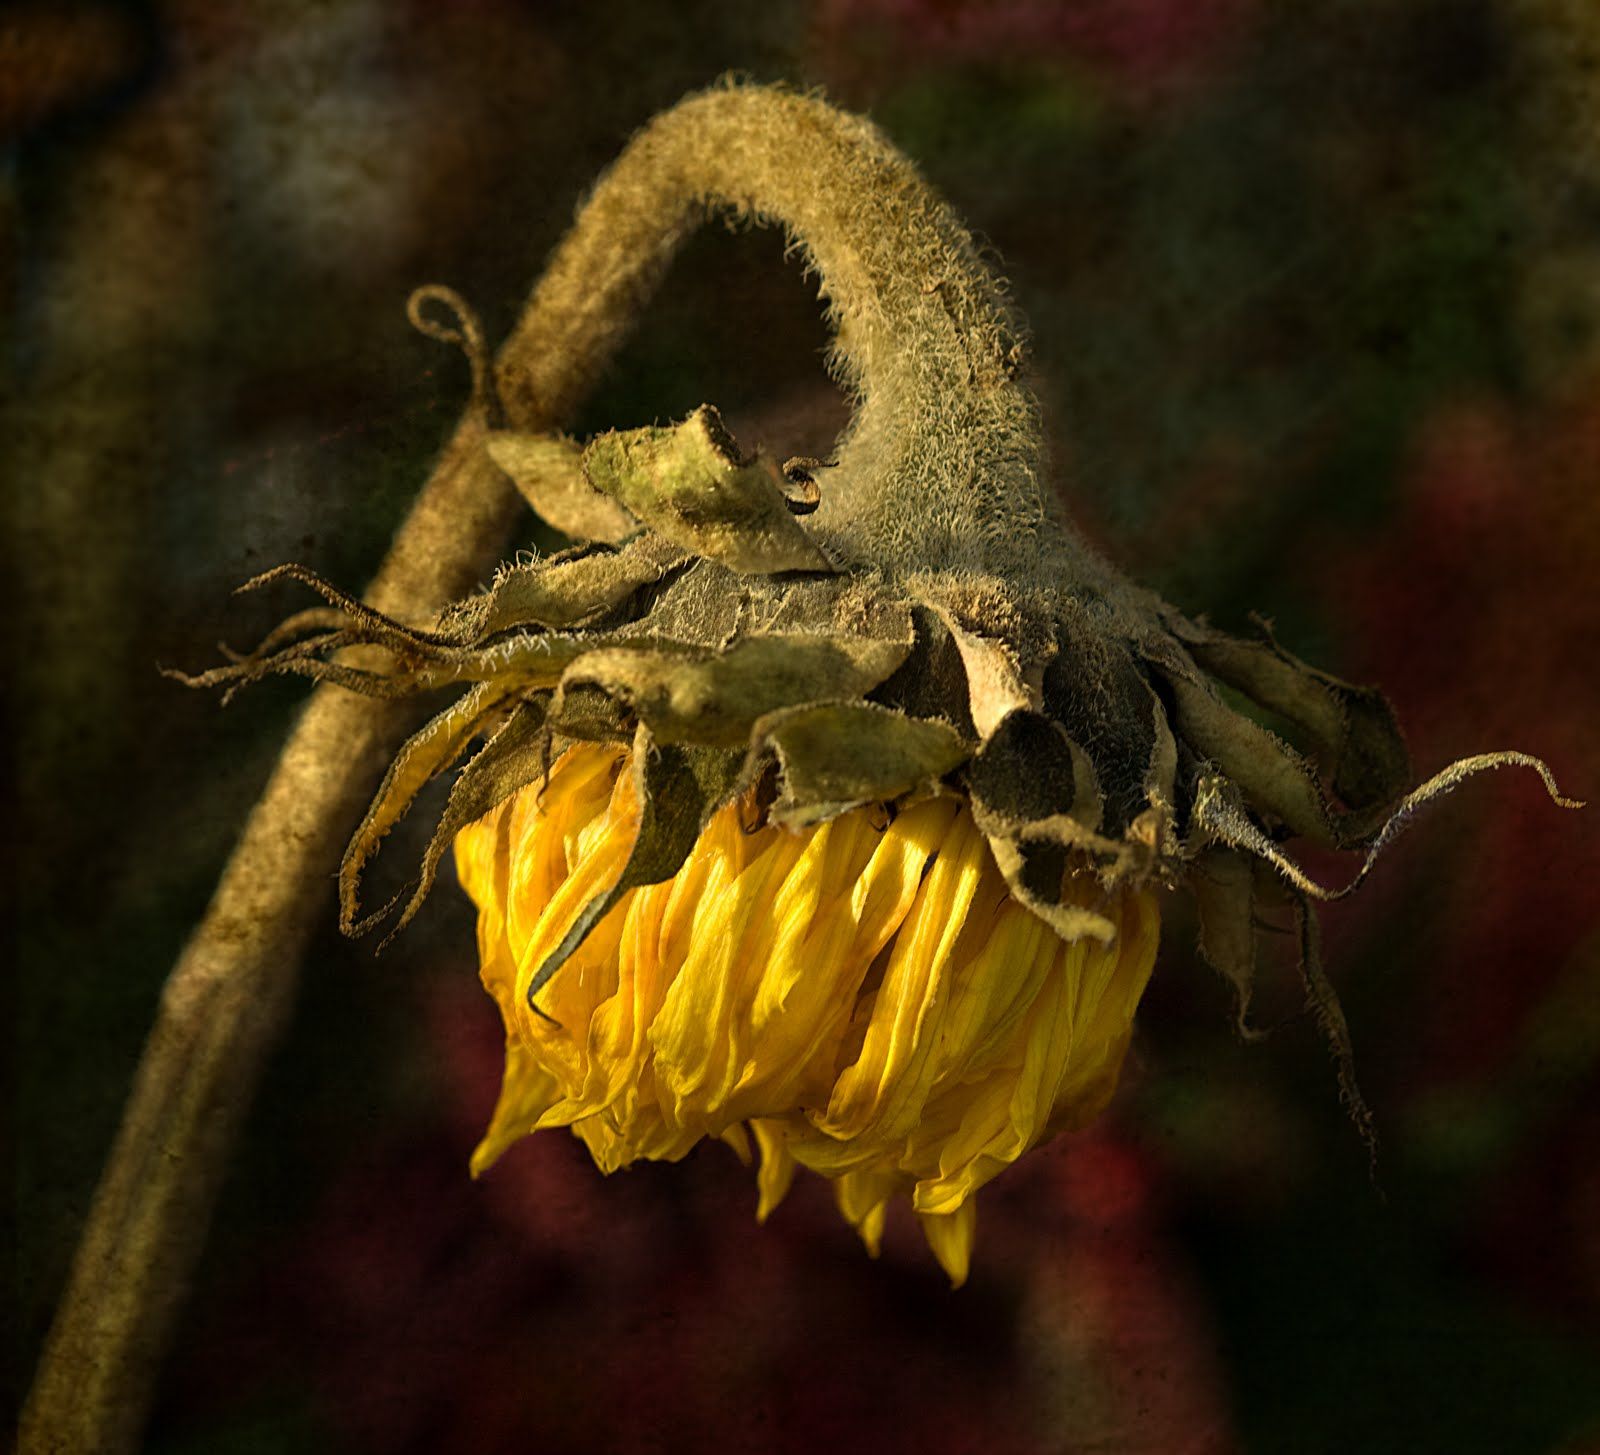 Dying Flowers | galleryhip.com - The Hippest Galleries! | Still ...